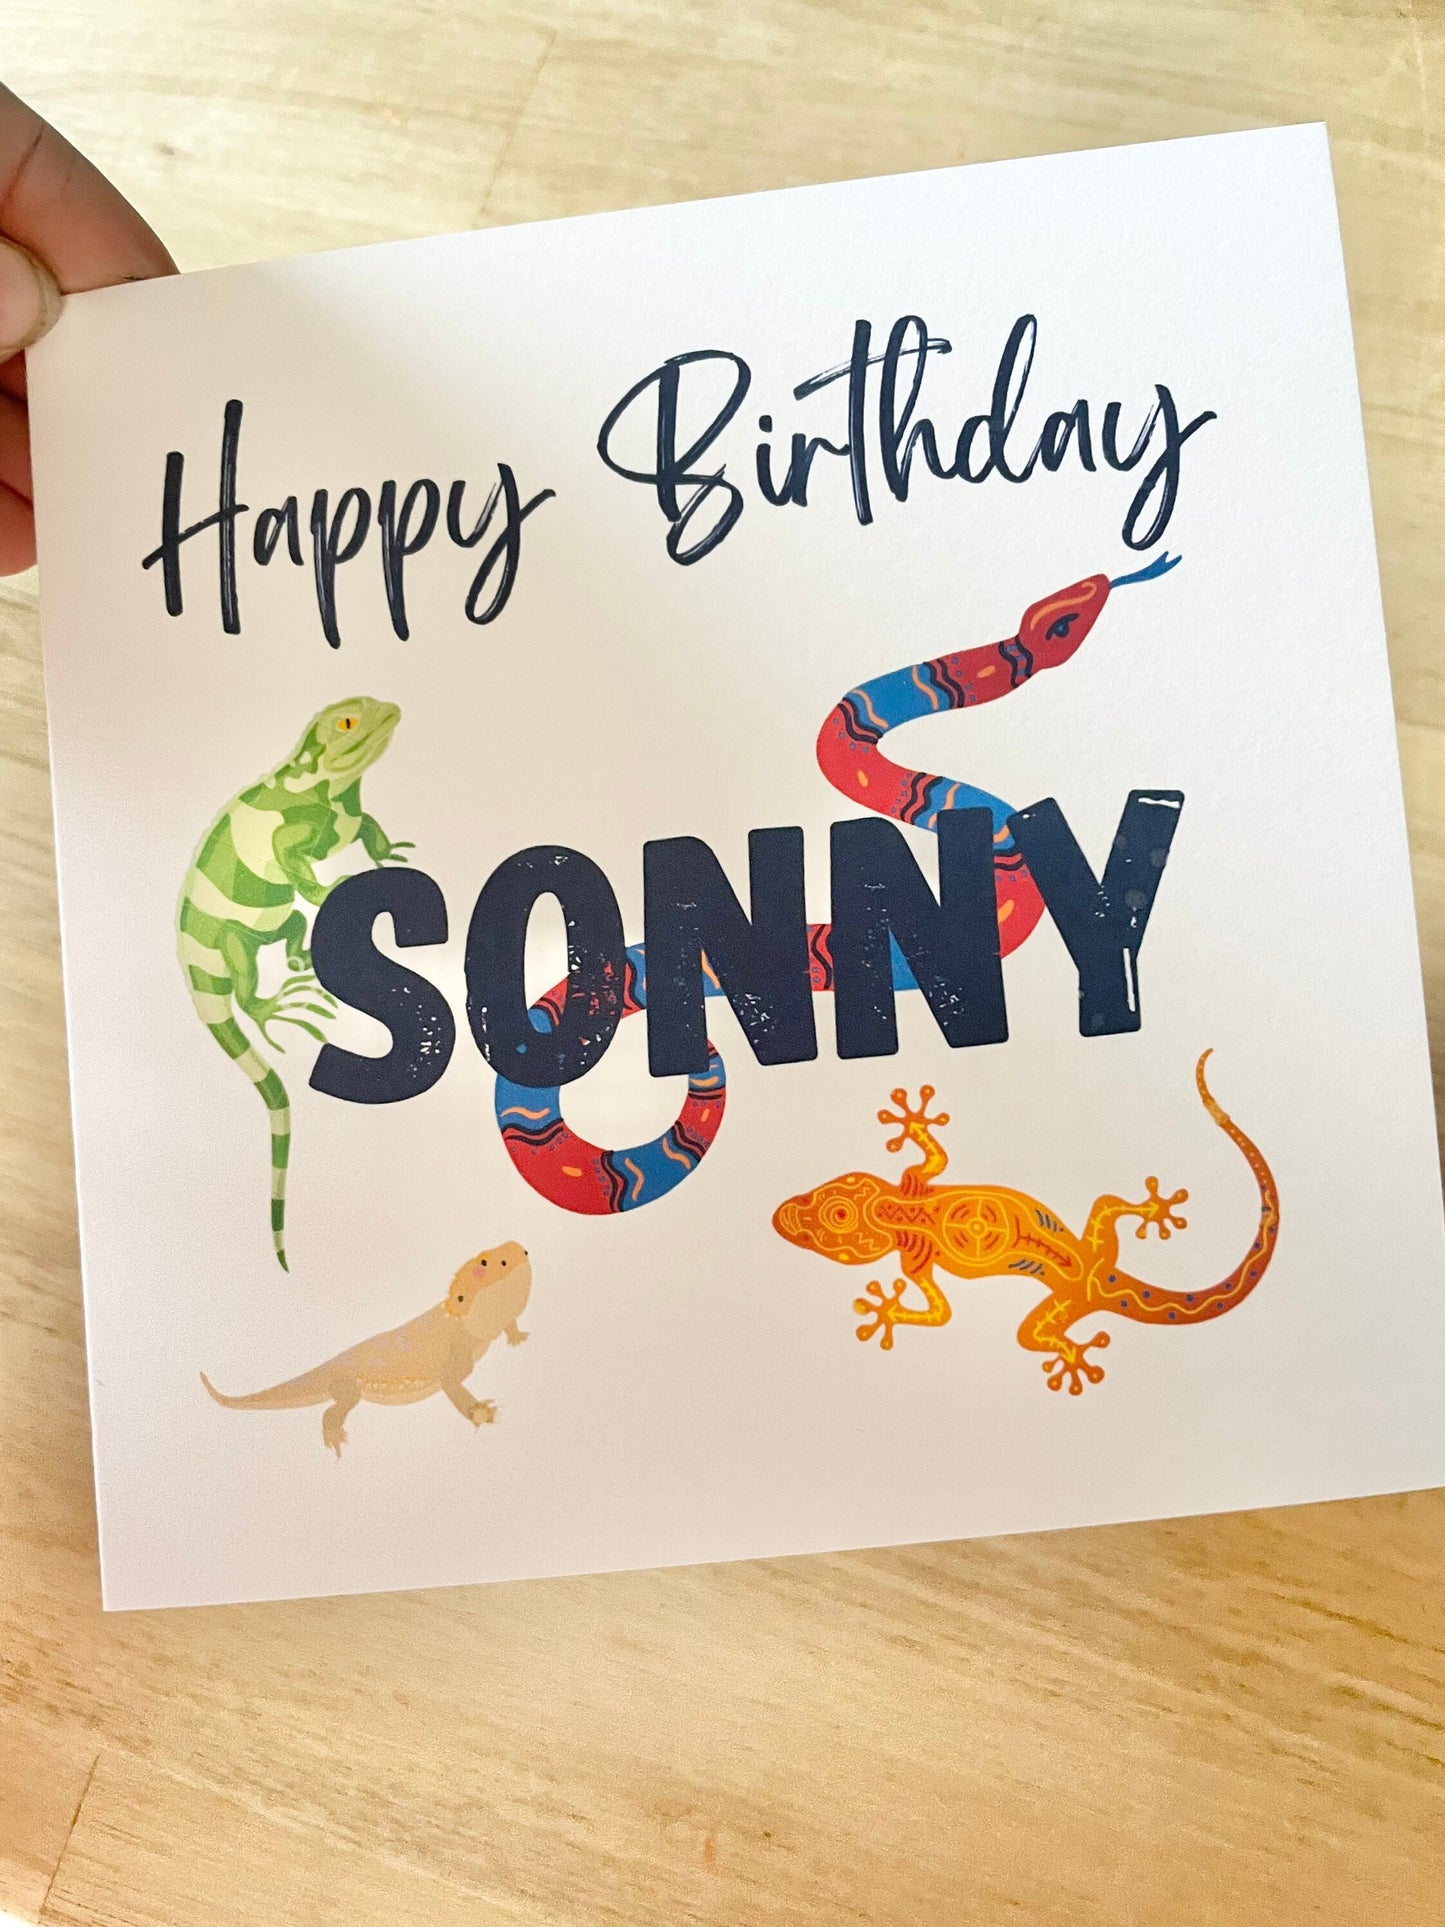 Boys personalised birthday card, reptile theme birthday card, snake, bearded dragon, chameleon design card, kids reptile party